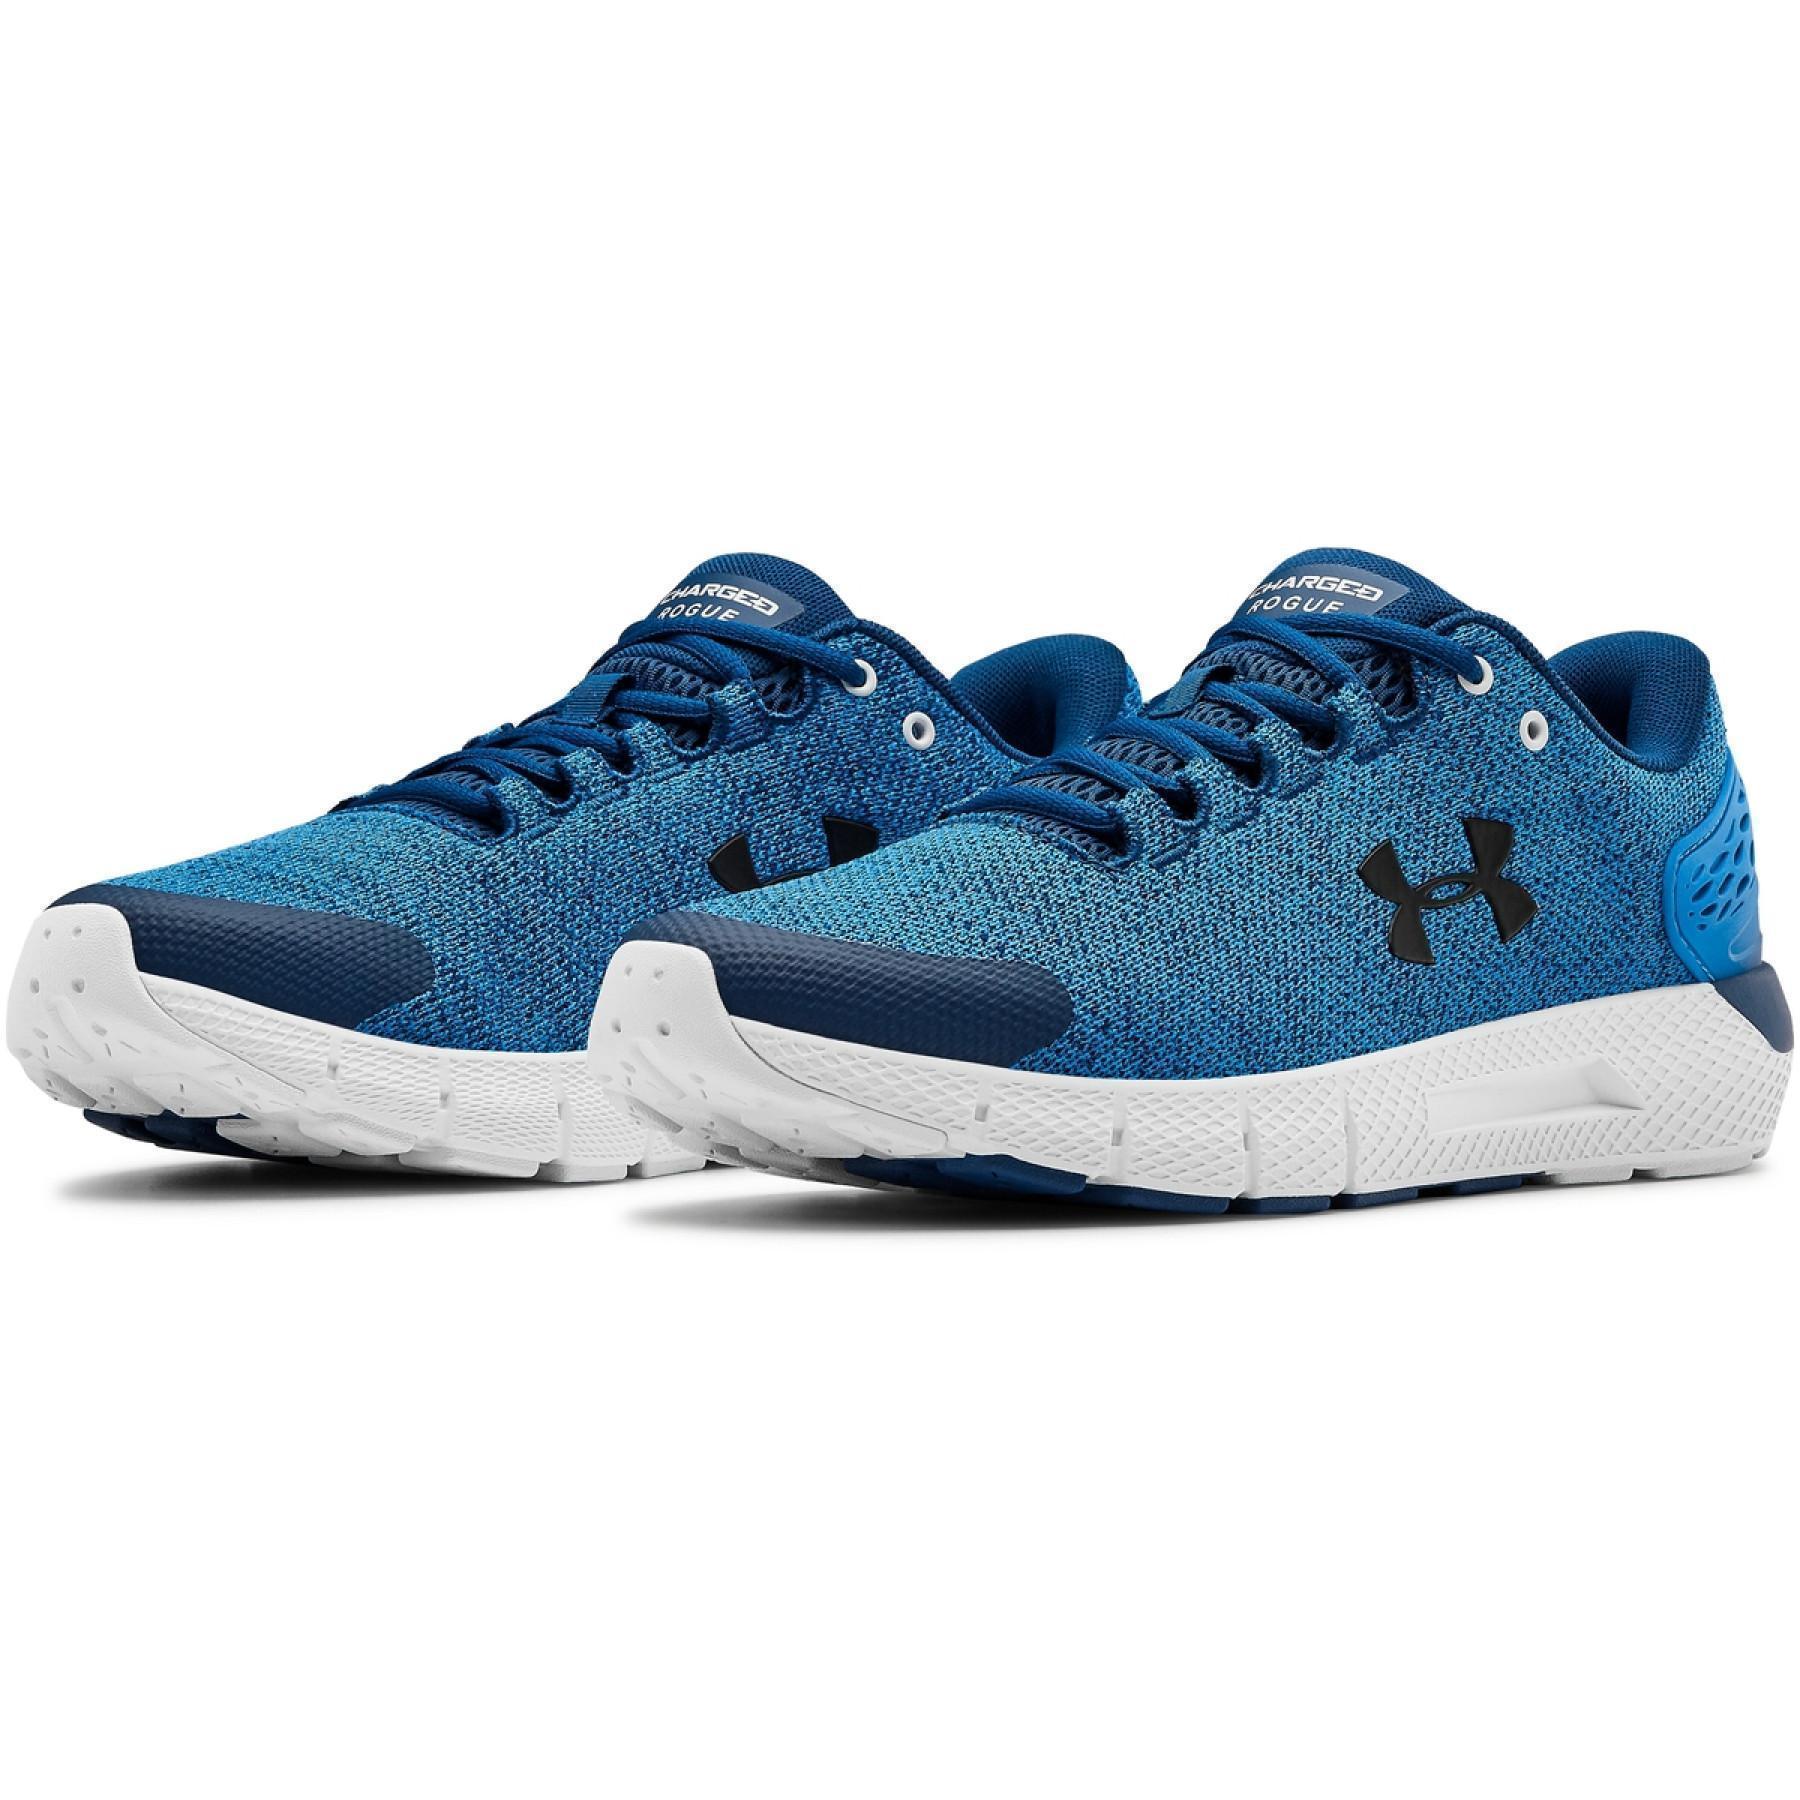 Chaussures de running Under Armour Charged Rogue 2 Twist